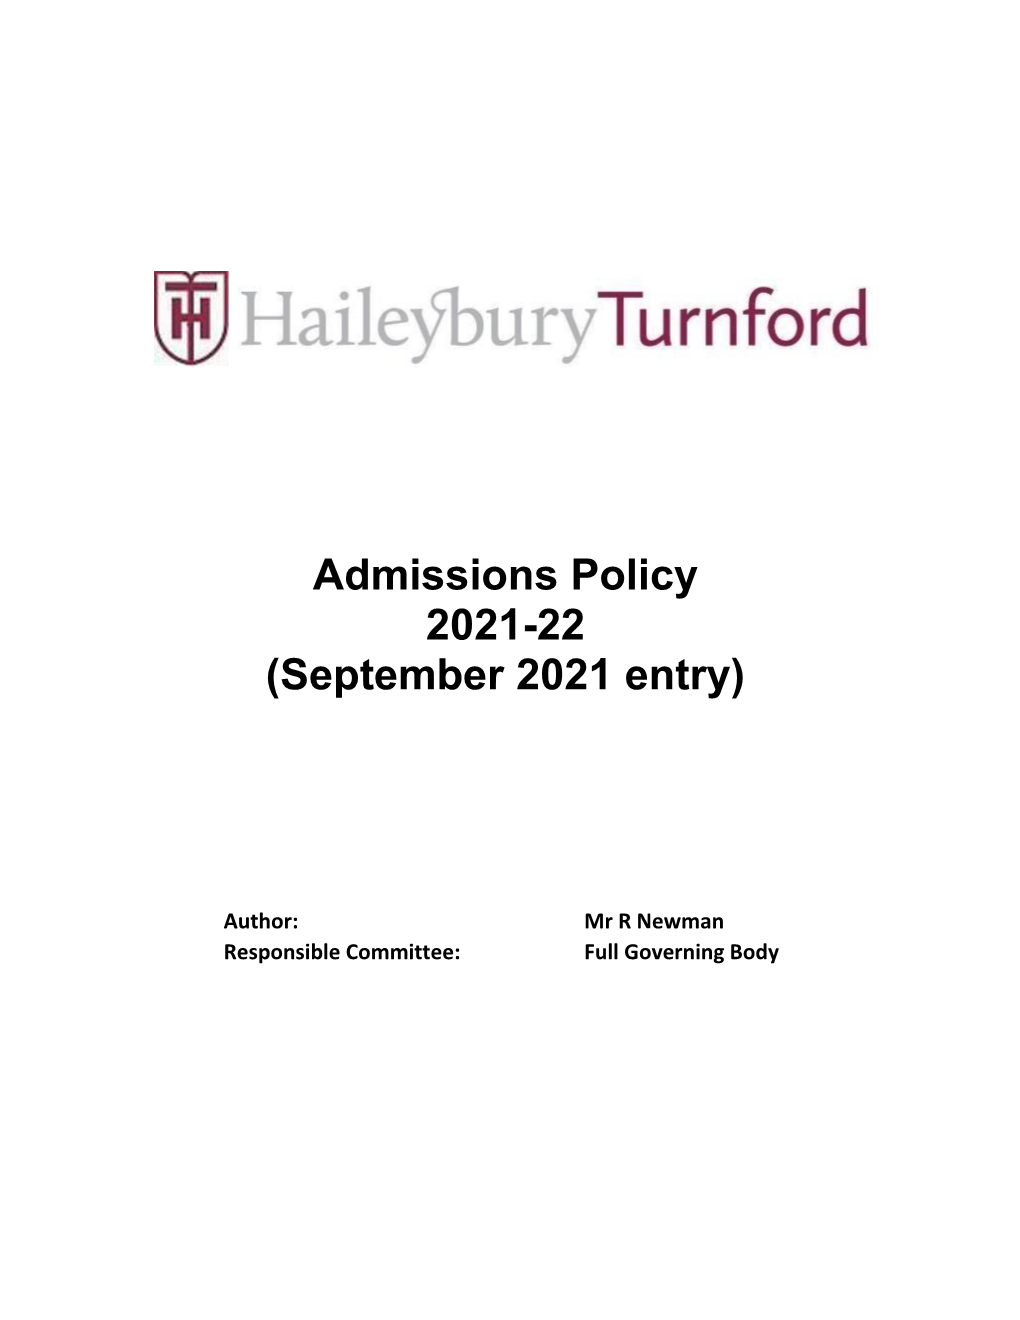 Admissions Policy 2021-22 (September 2021 Entry)